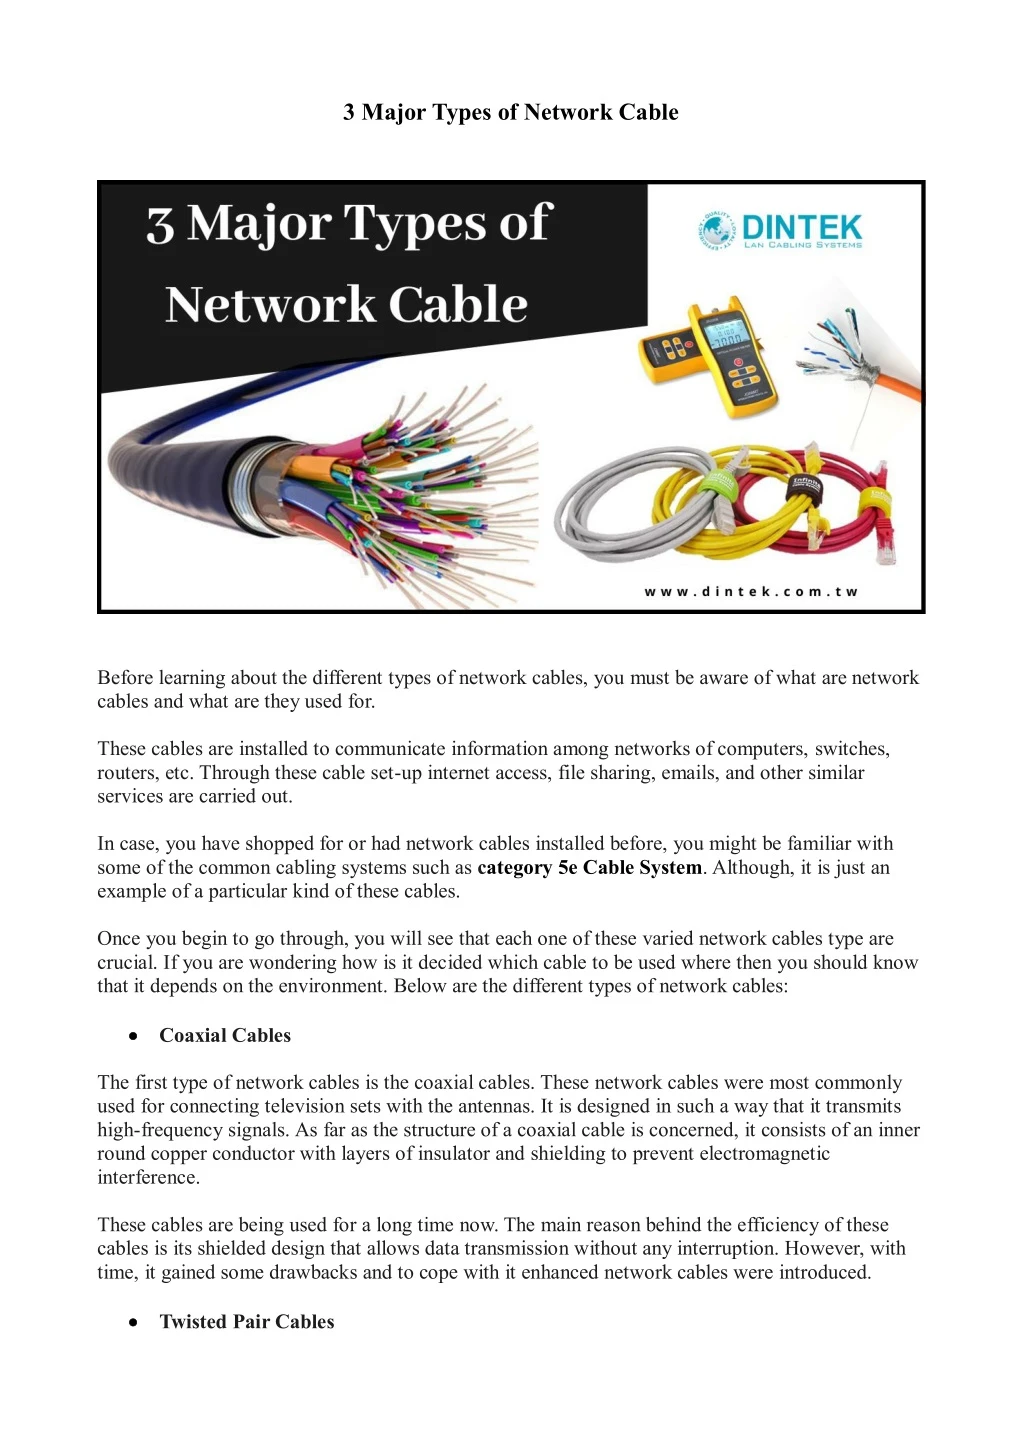 3 major types of network cable